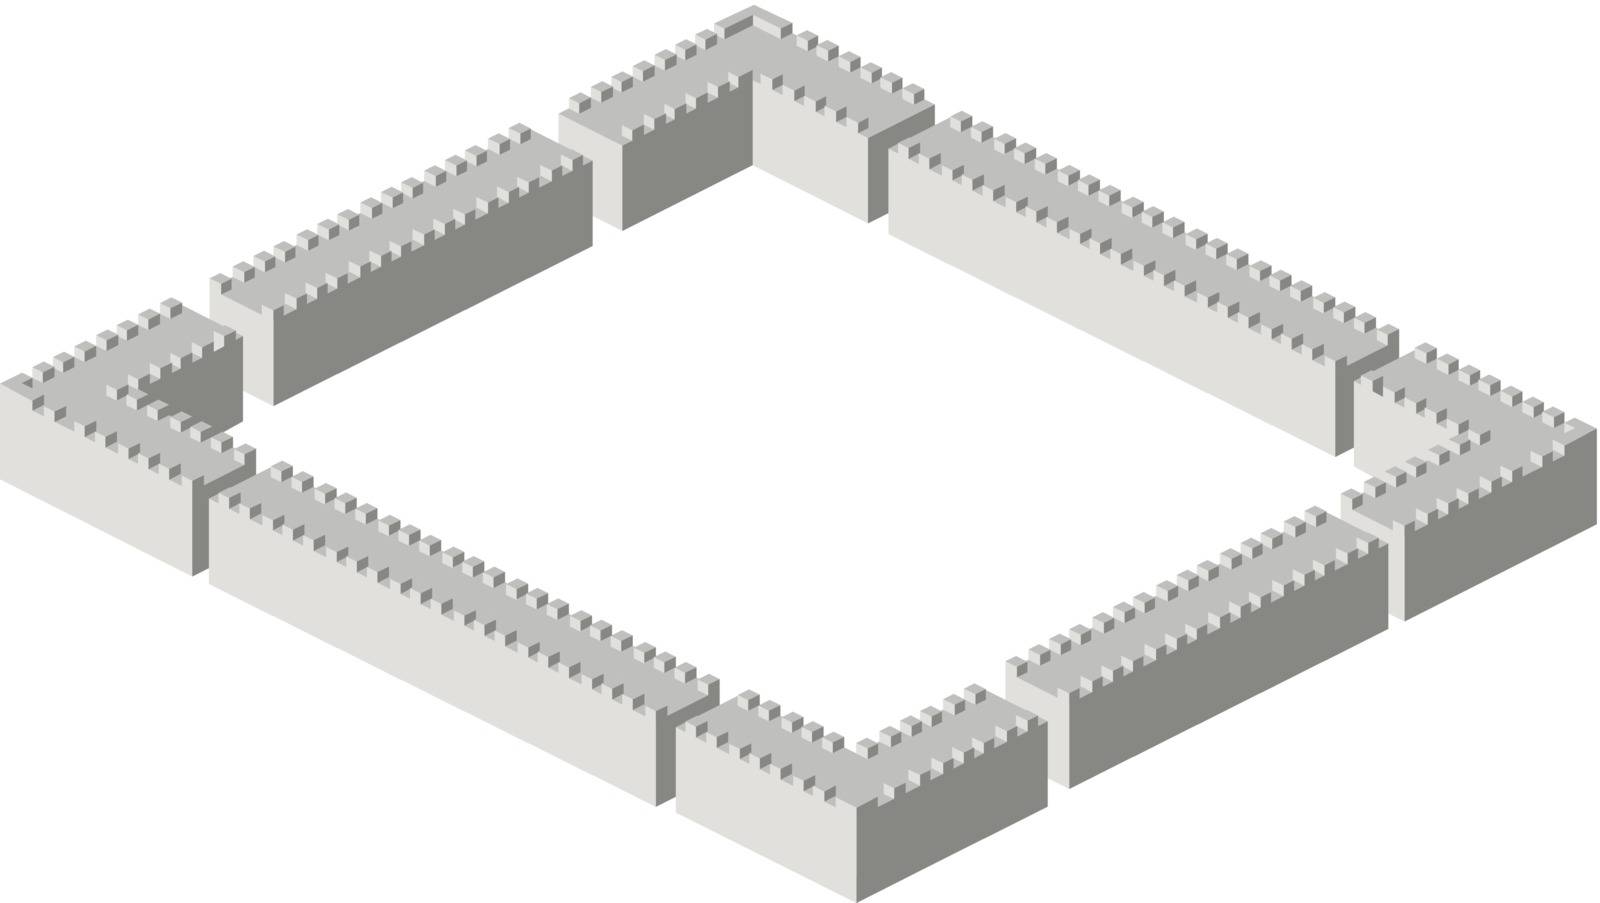 Isometric view of large stone walls and corners